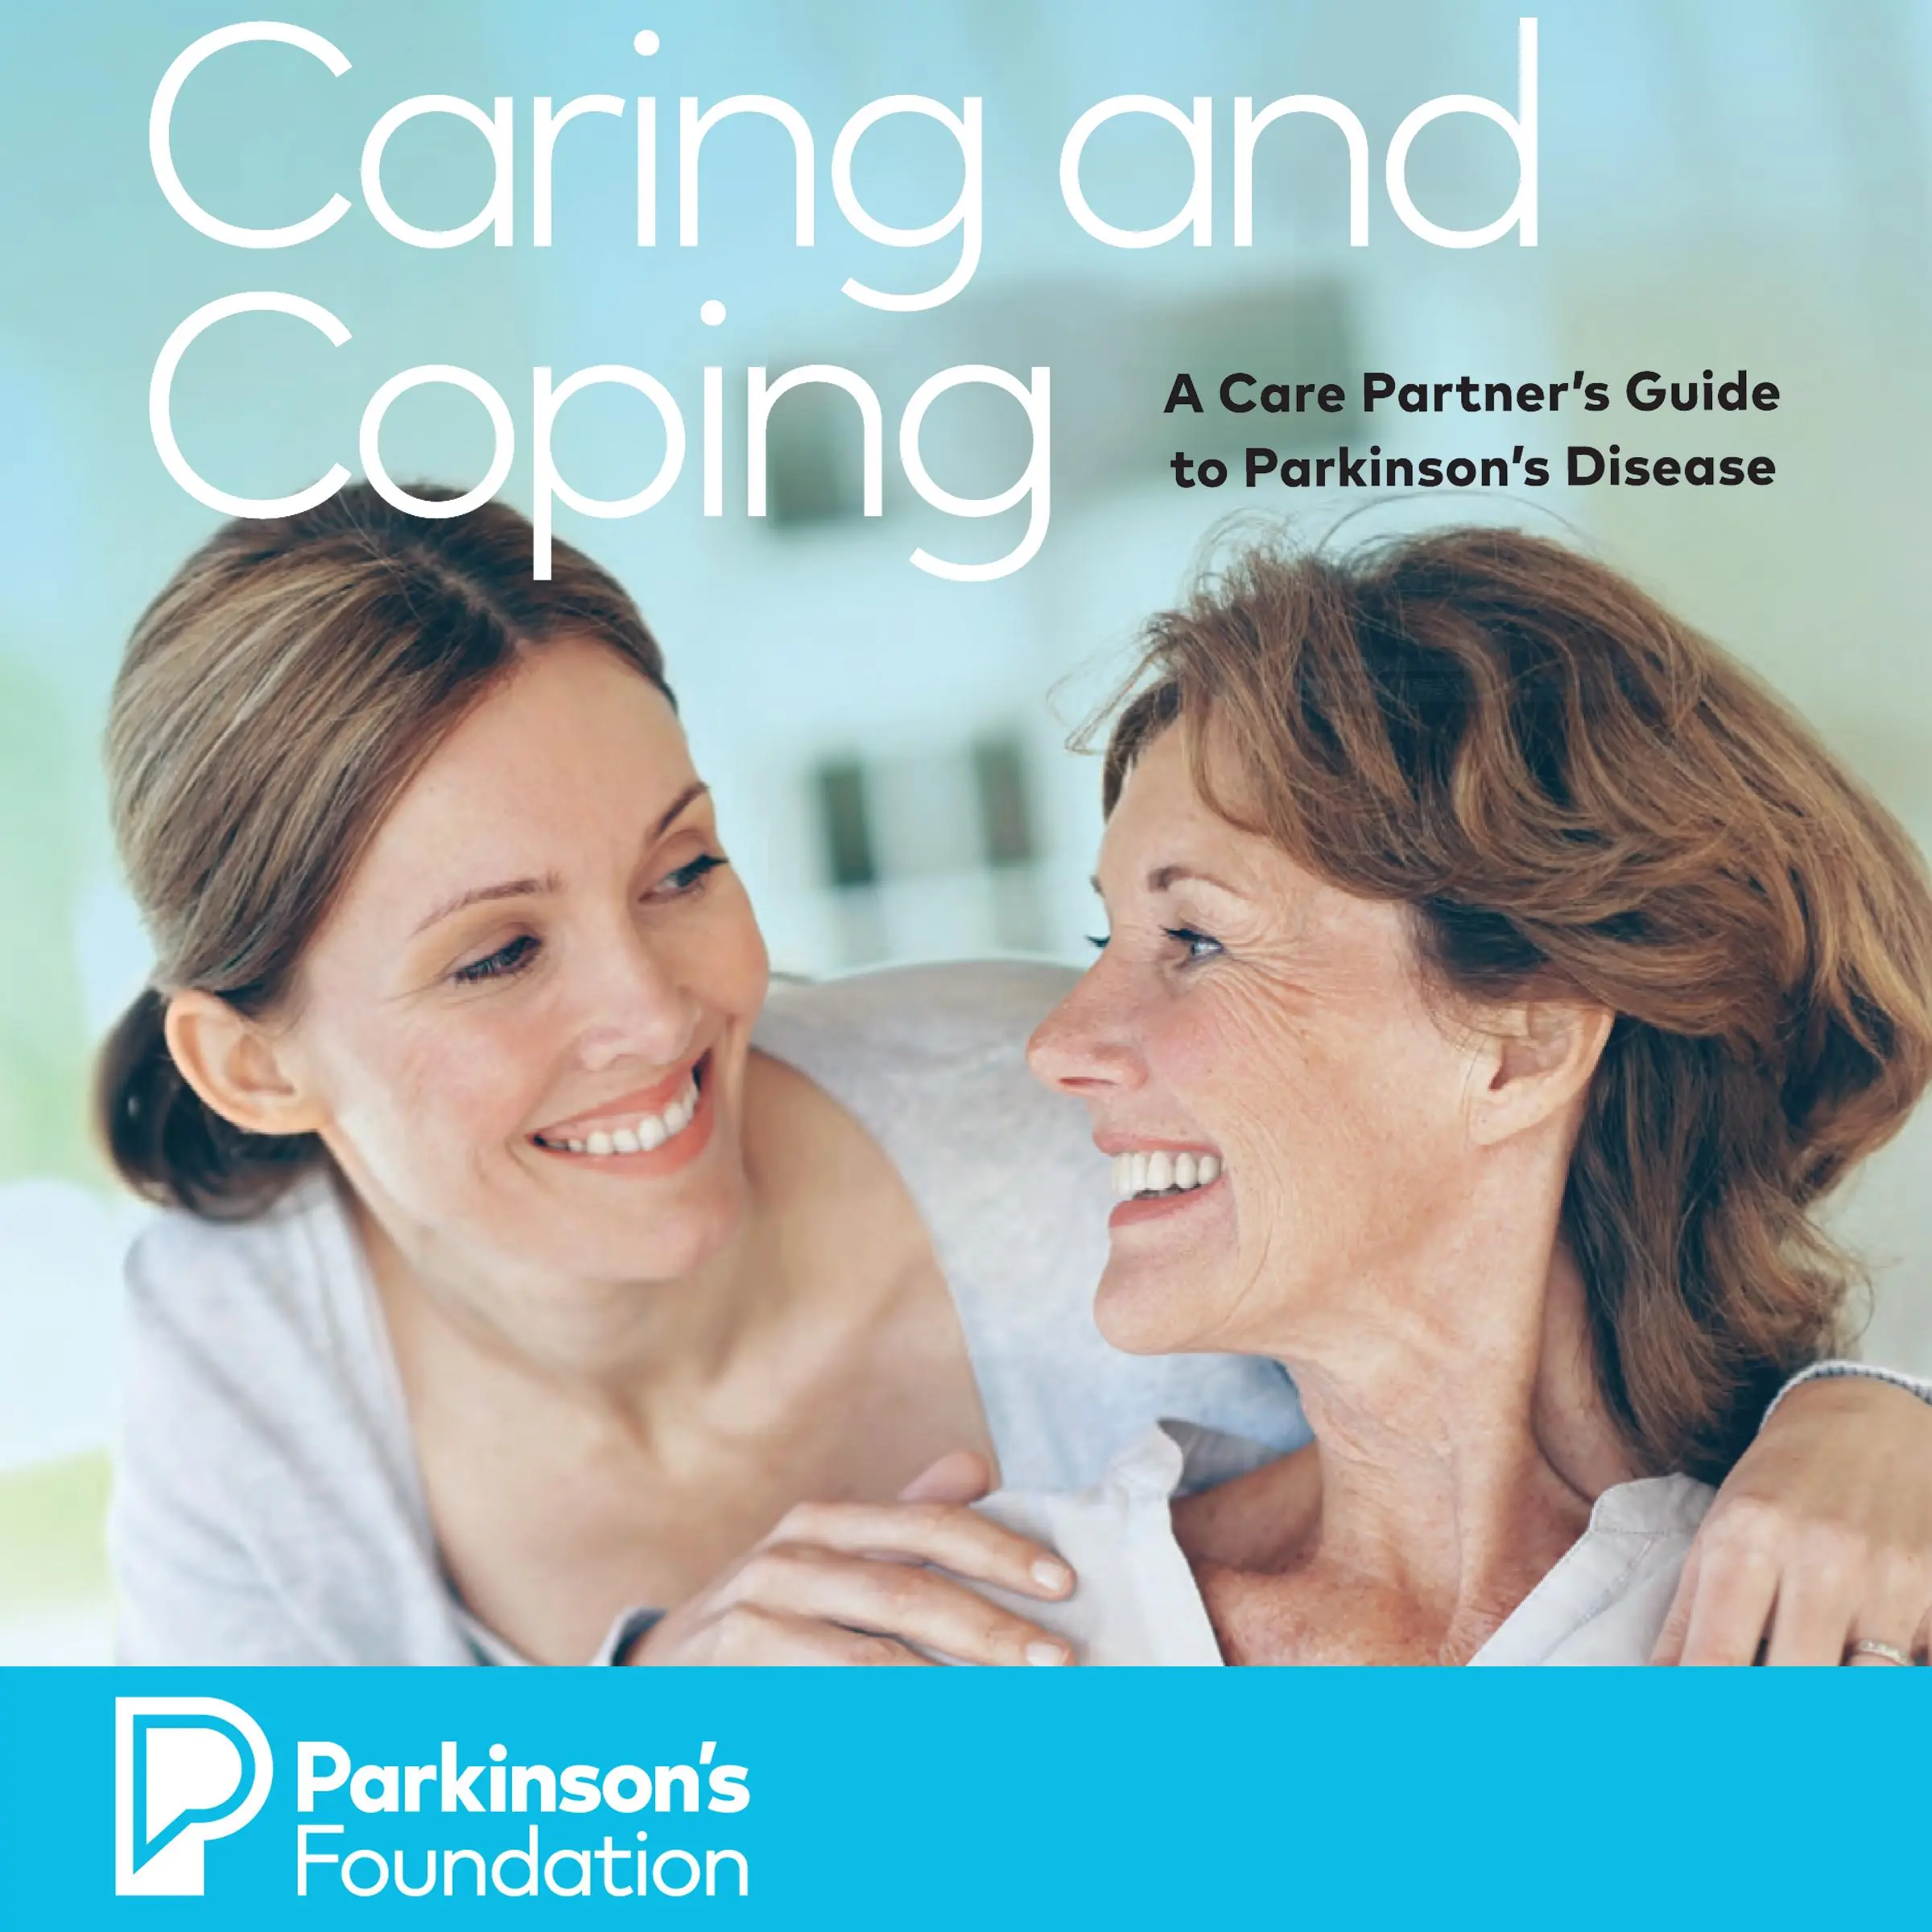 Caring and Coping Audiobook by Parkinson's Foundation